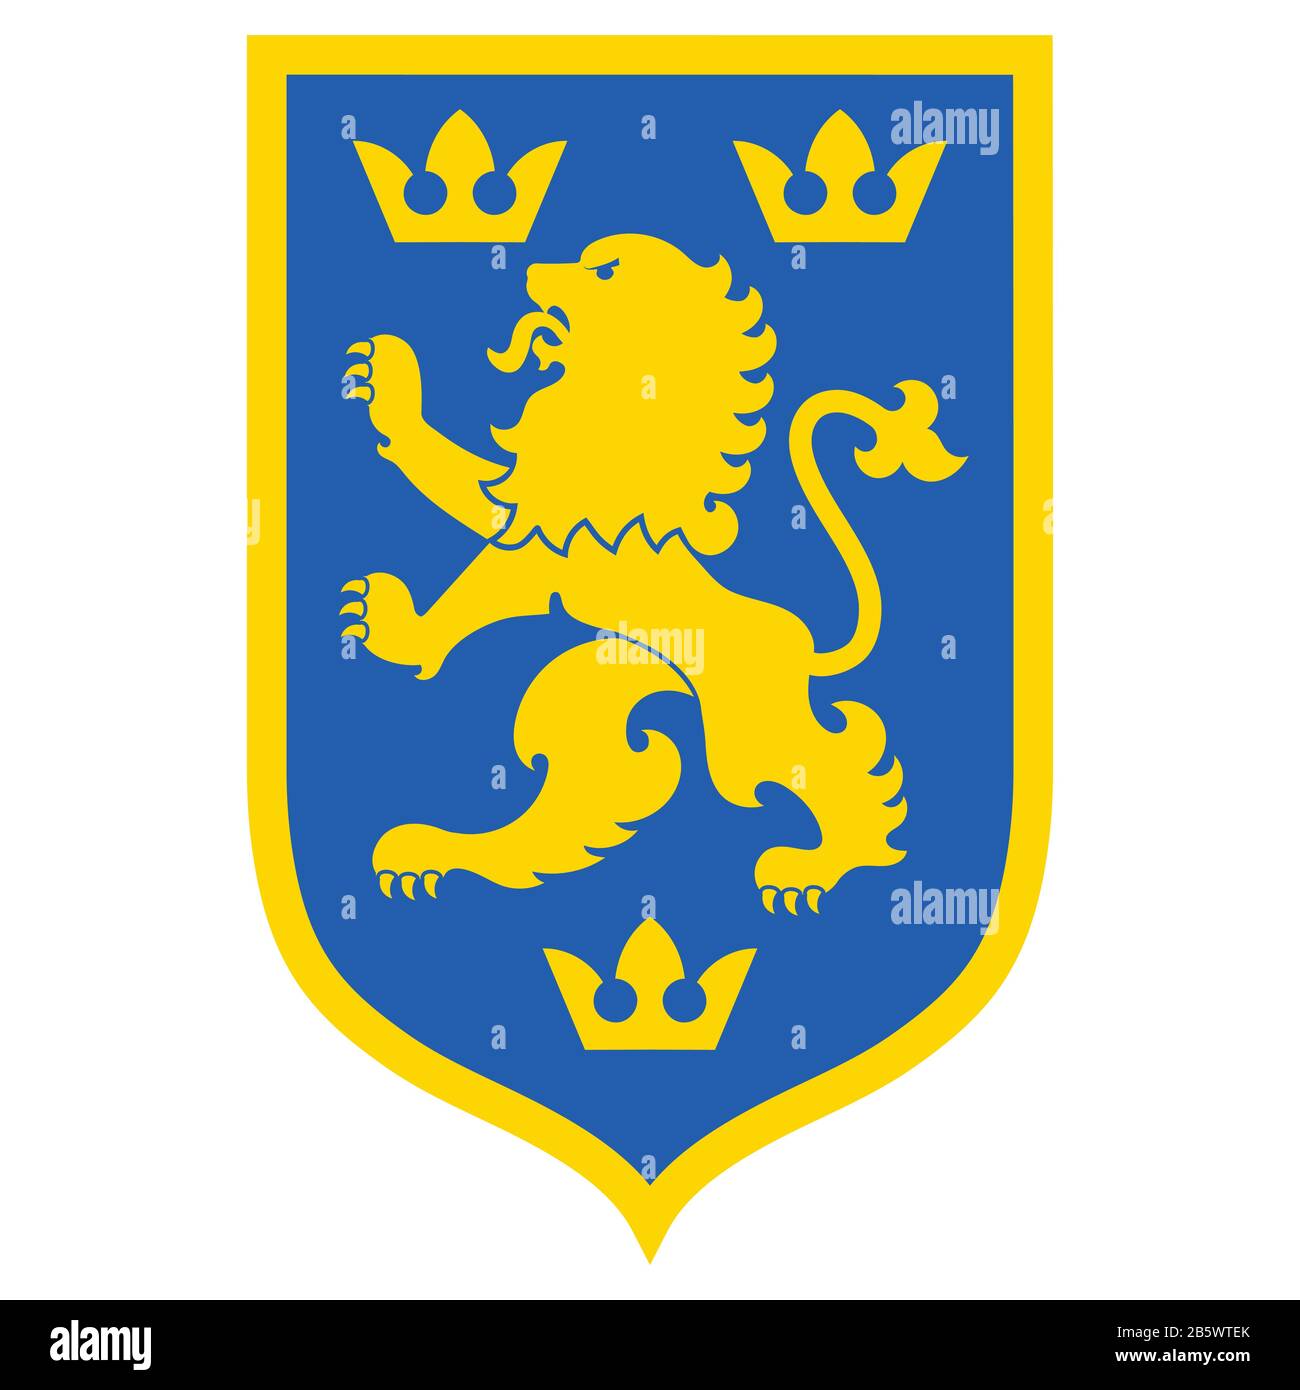 3 Three Crowns Tre Kronor of Sweden Swedish Coat of Arms Distressed | Art  Board Print